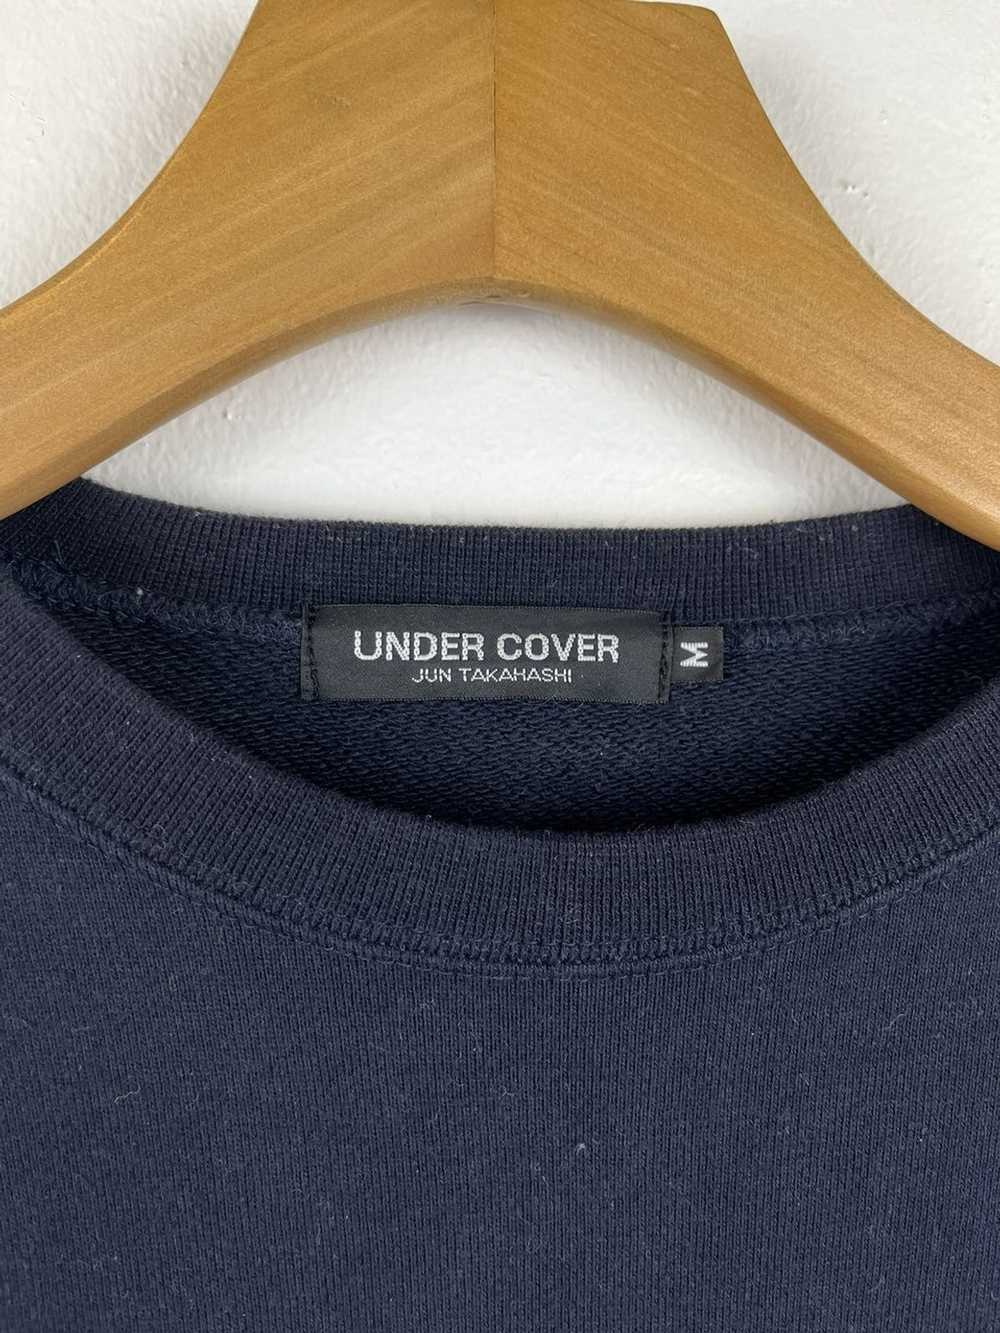 Undercover Undercover Nirvana Apple Sweater - image 3